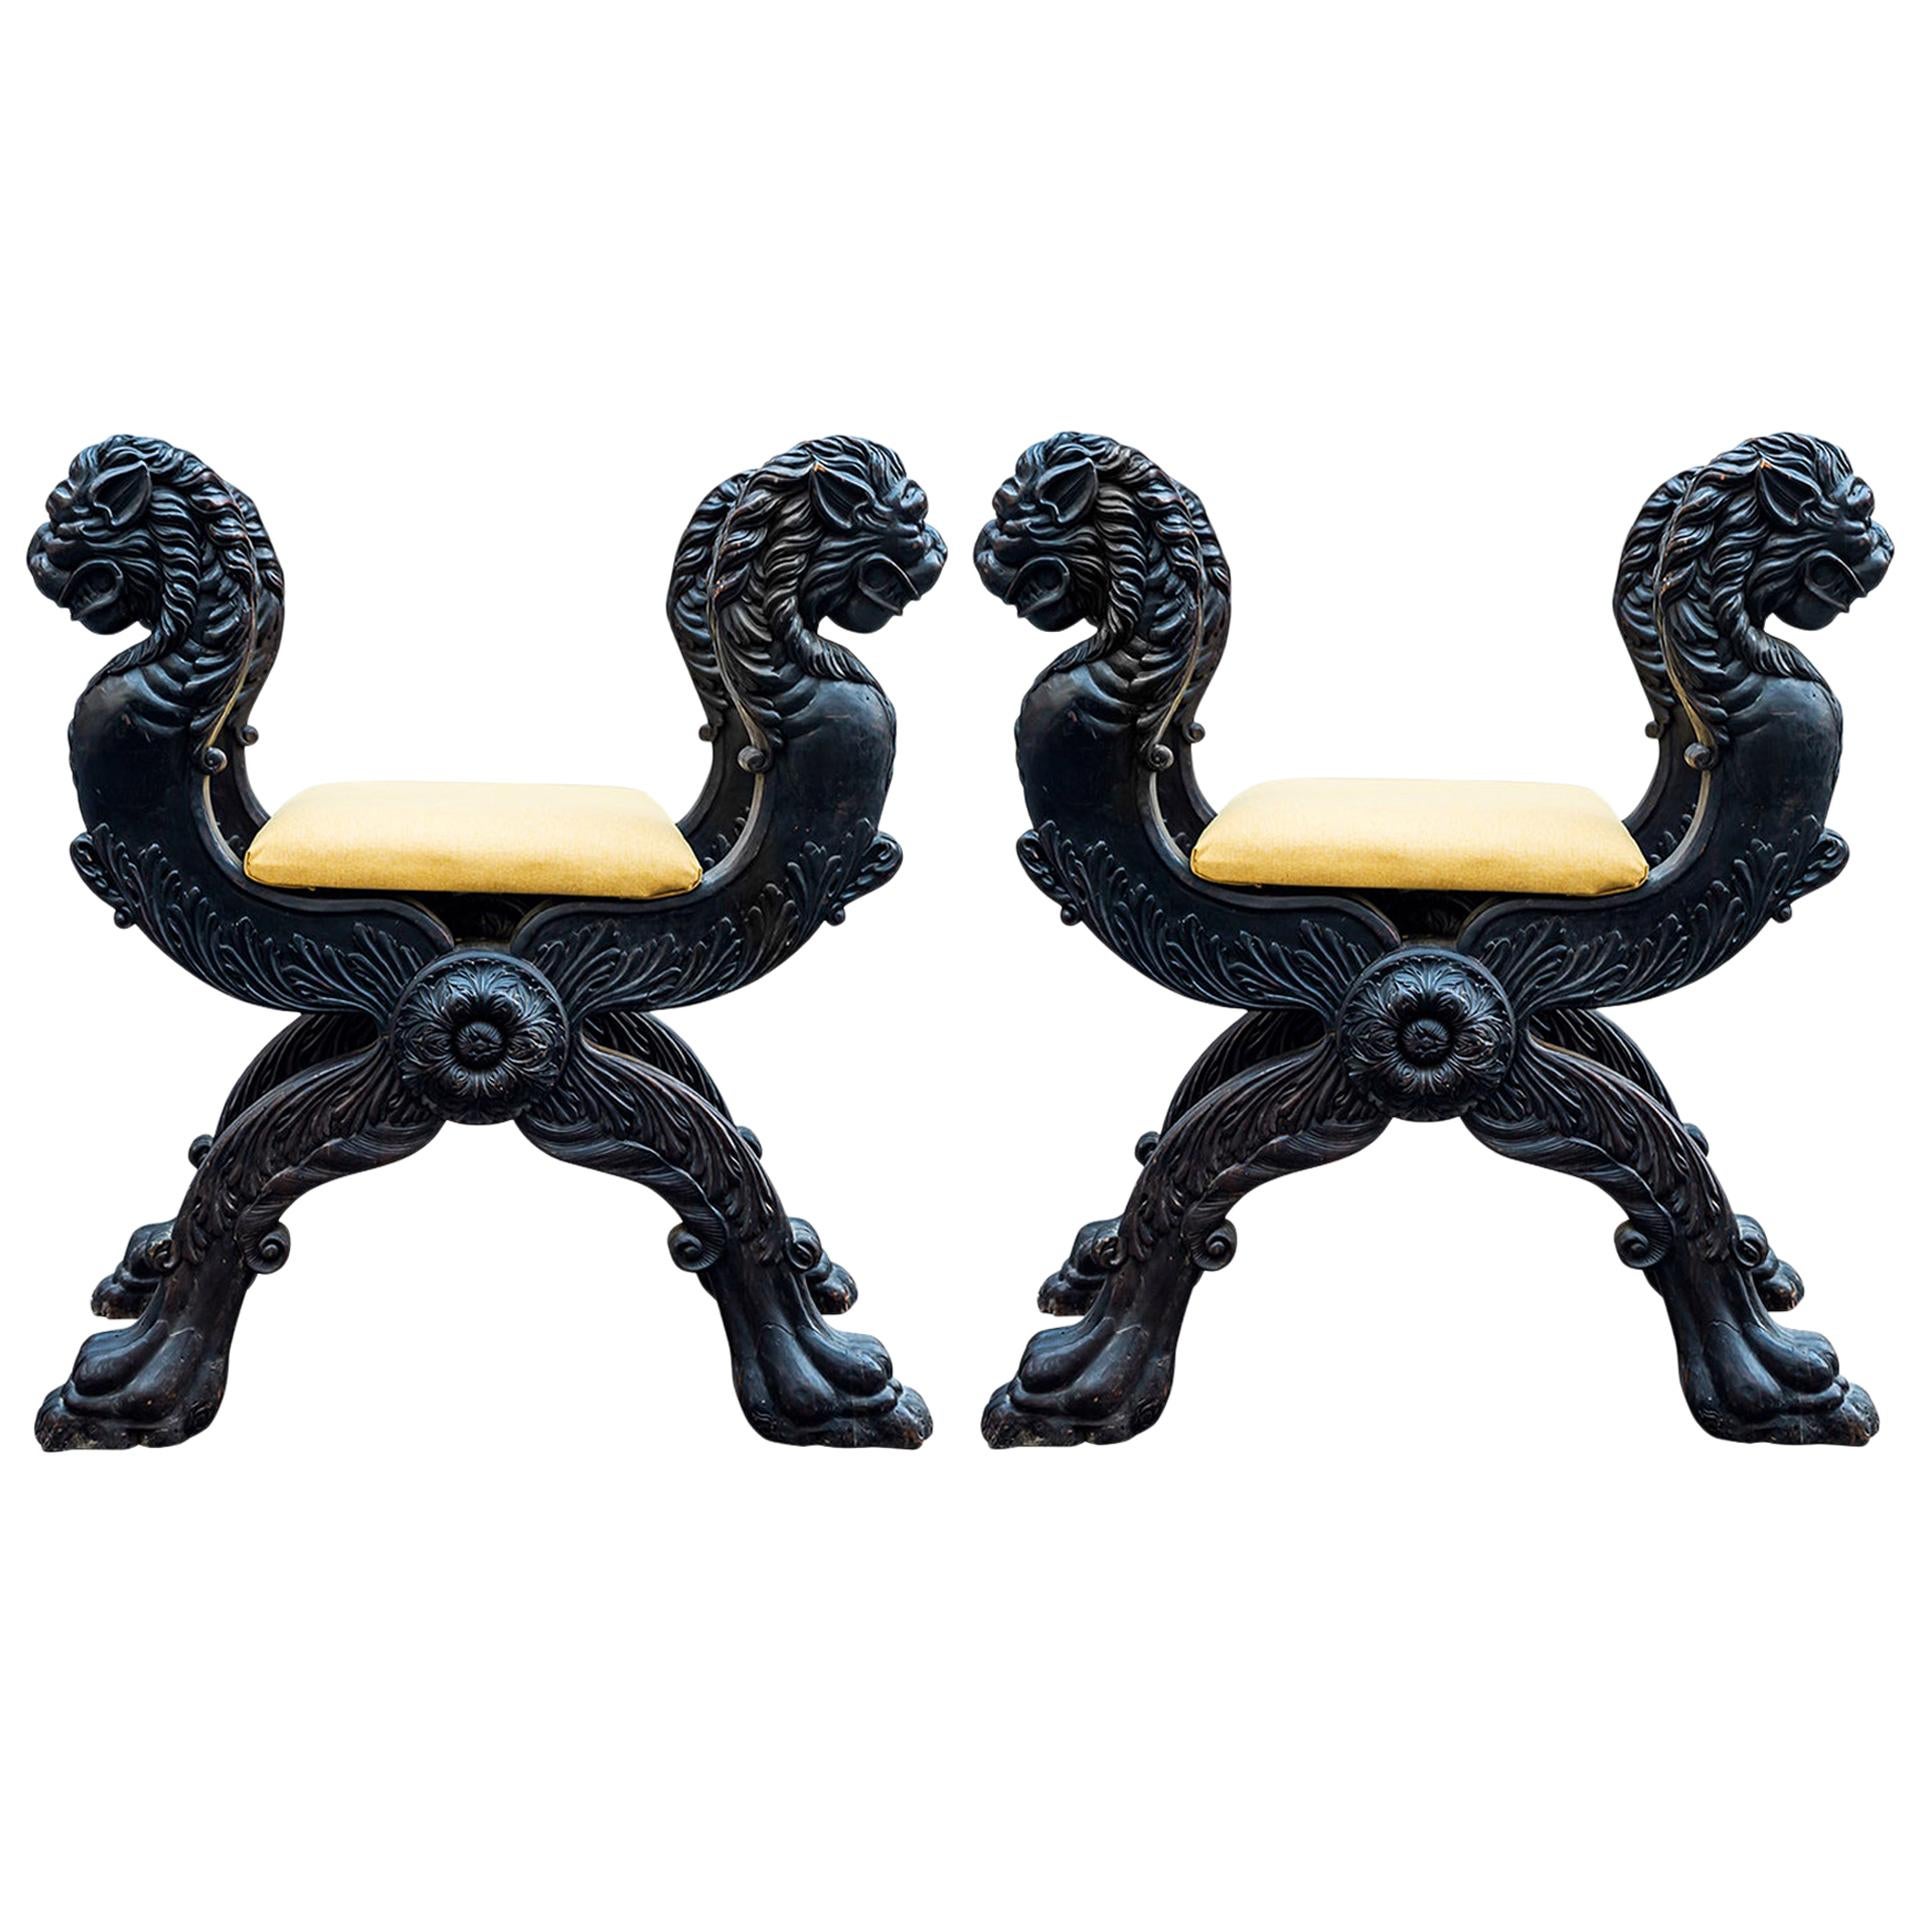 Rare Pair of Castle Curule Seats, France, Late 19th Century